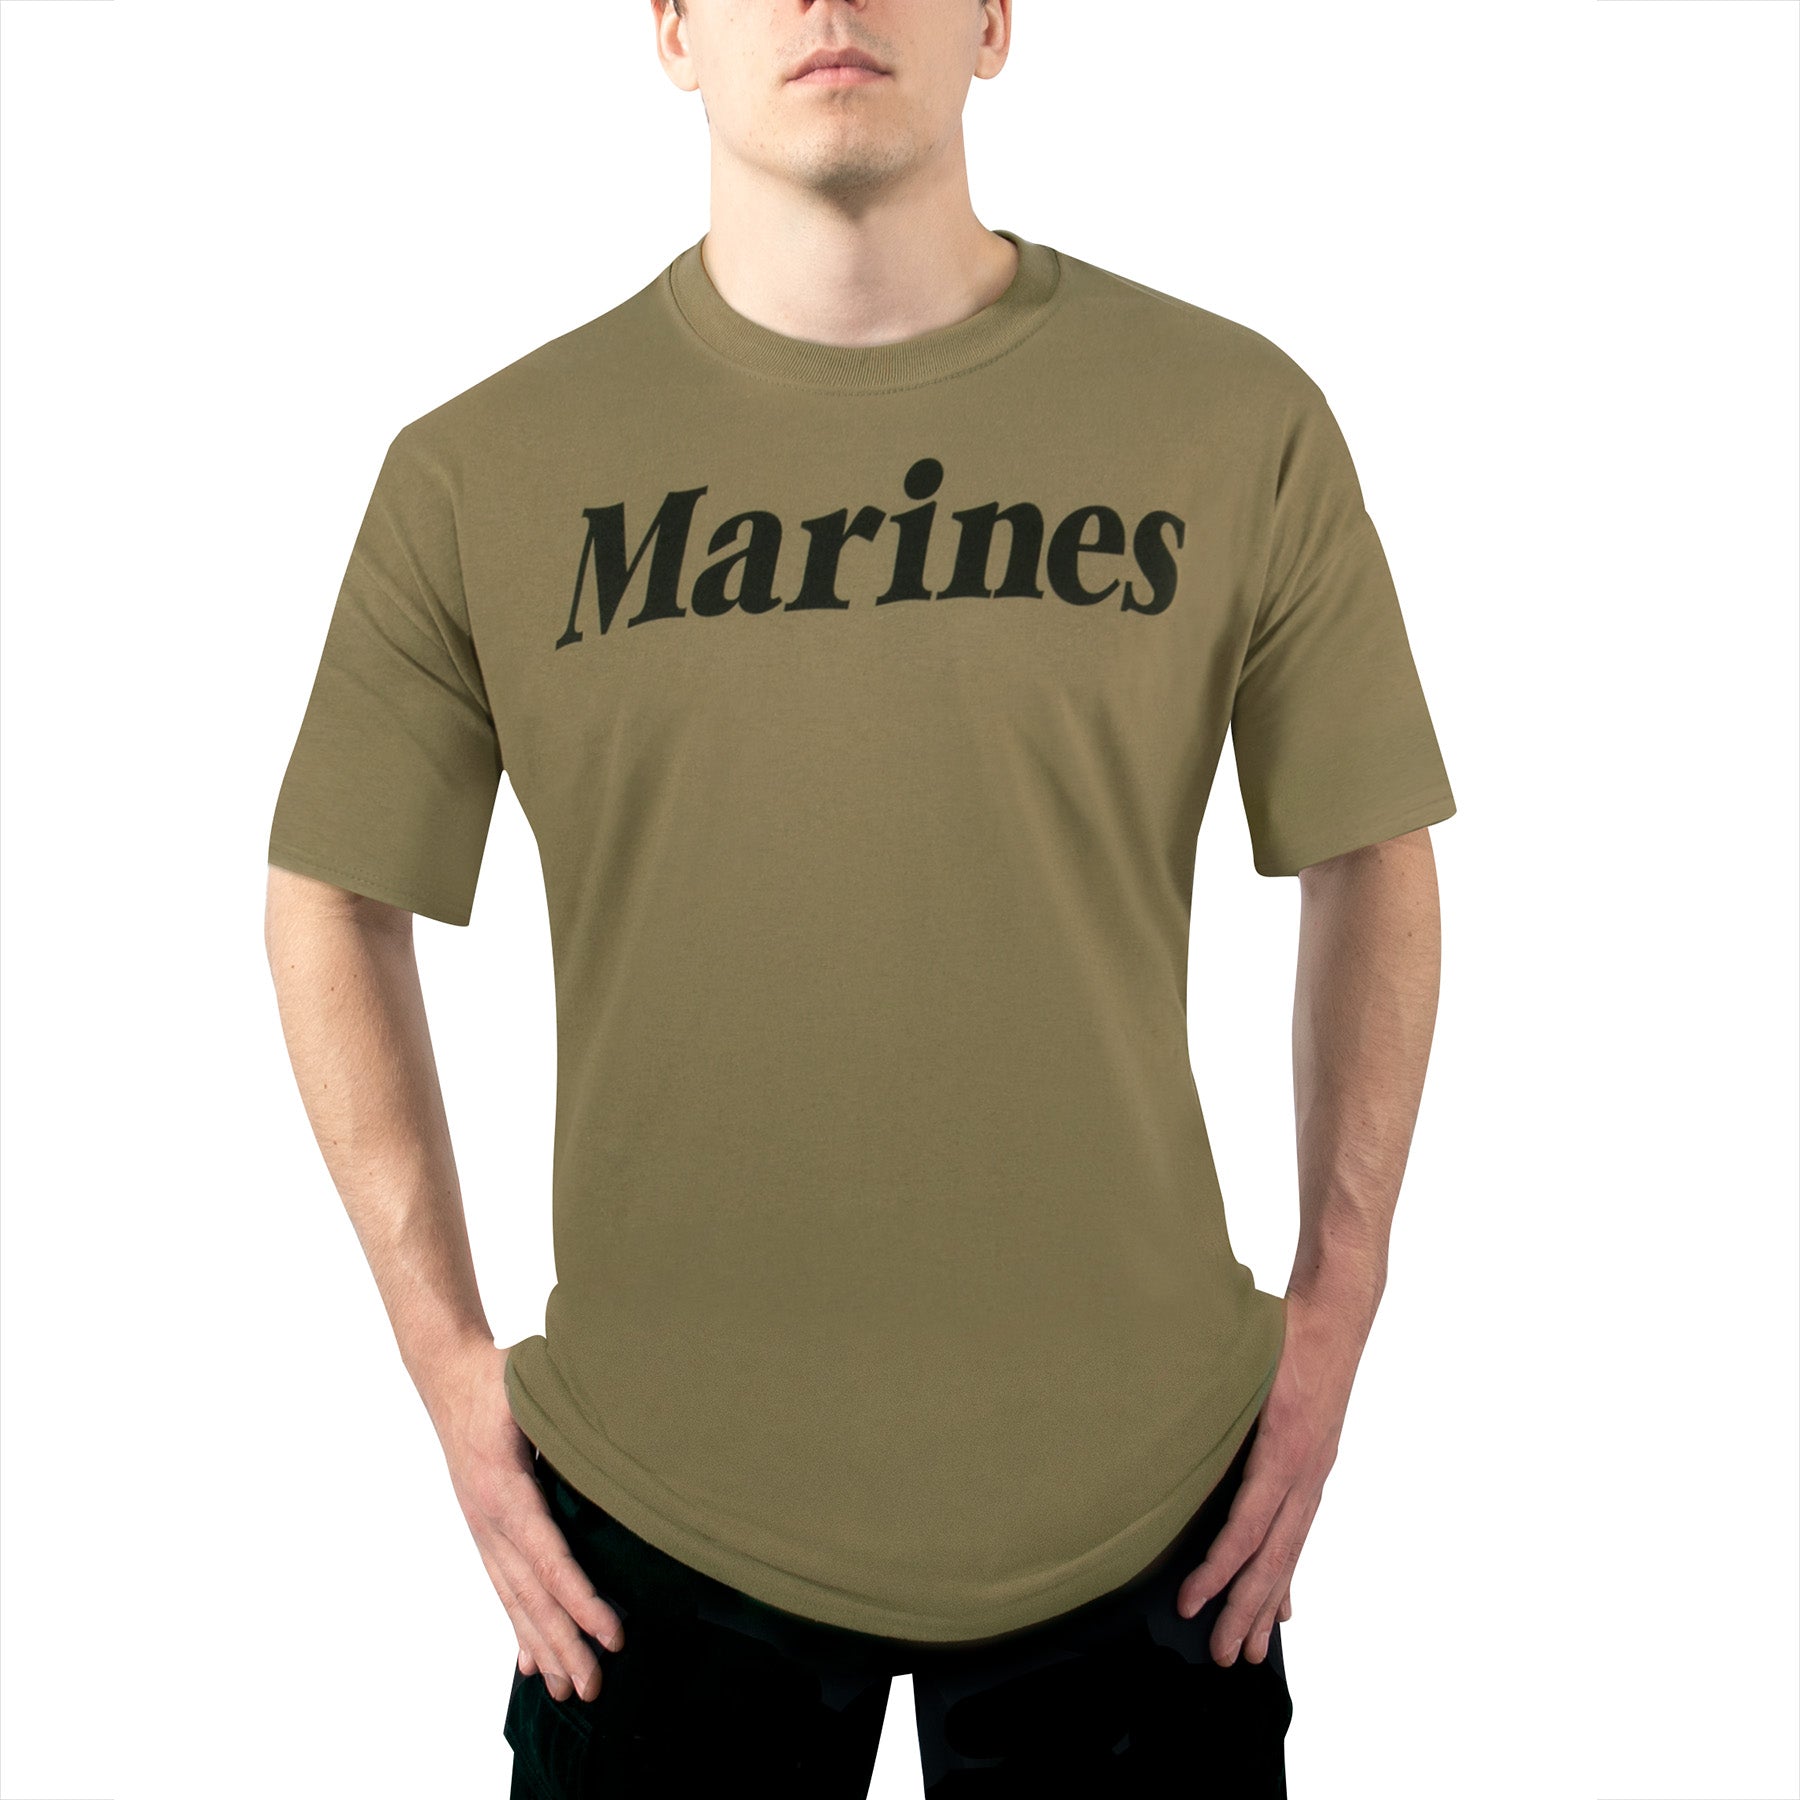 [AR 670-1][Military] Cotton Marines Physical Training T-Shirts Coyote Brown